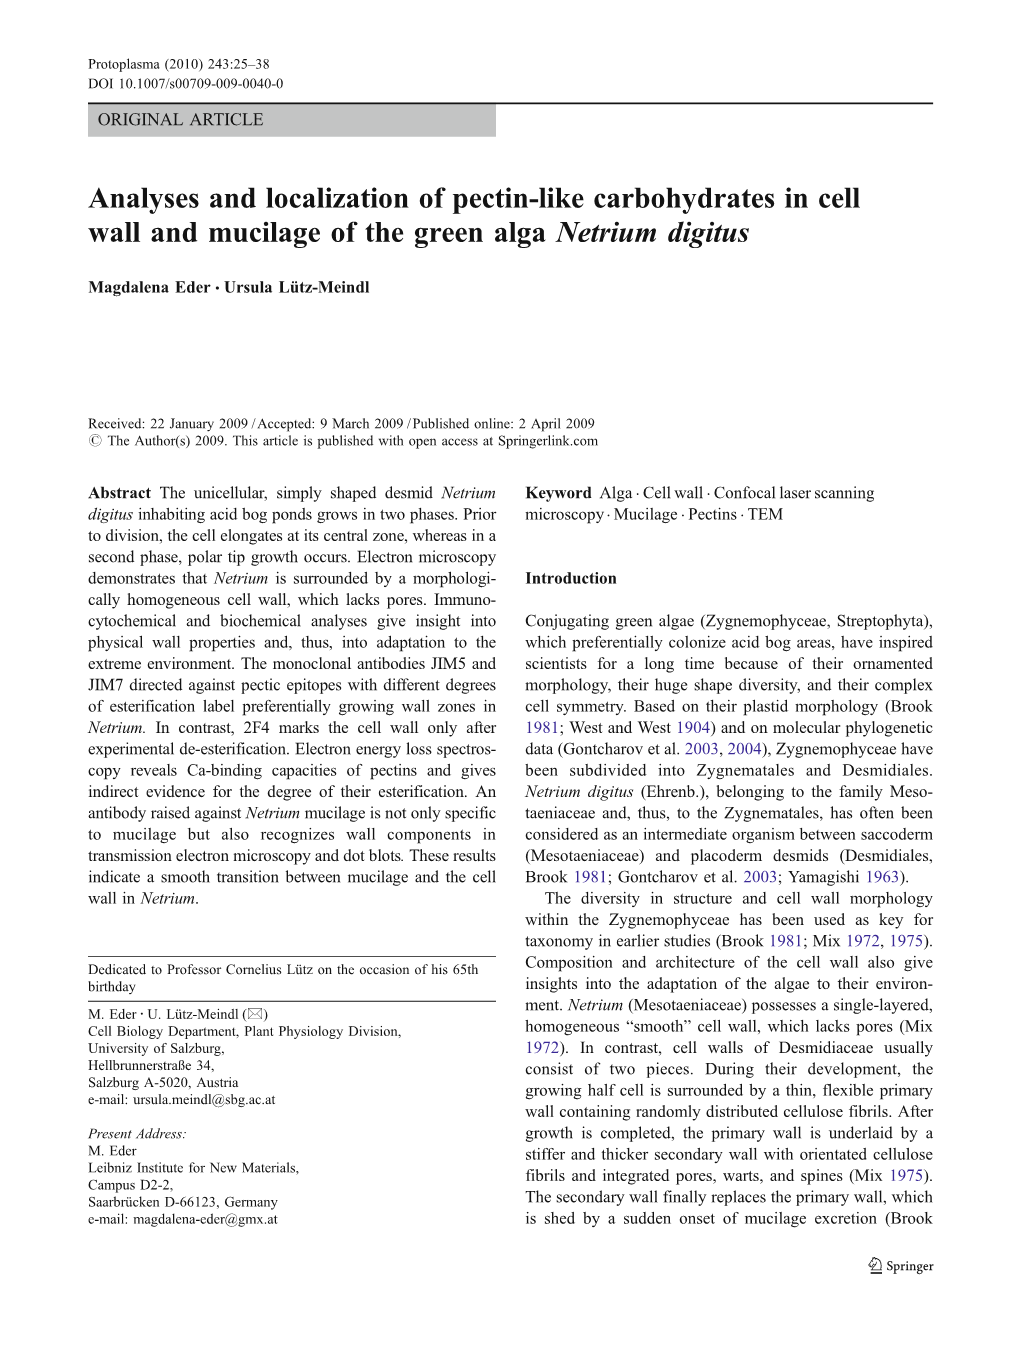 Analyses and Localization of Pectin-Like Carbohydrates in Cell Wall and Mucilage of the Green Alga Netrium Digitus